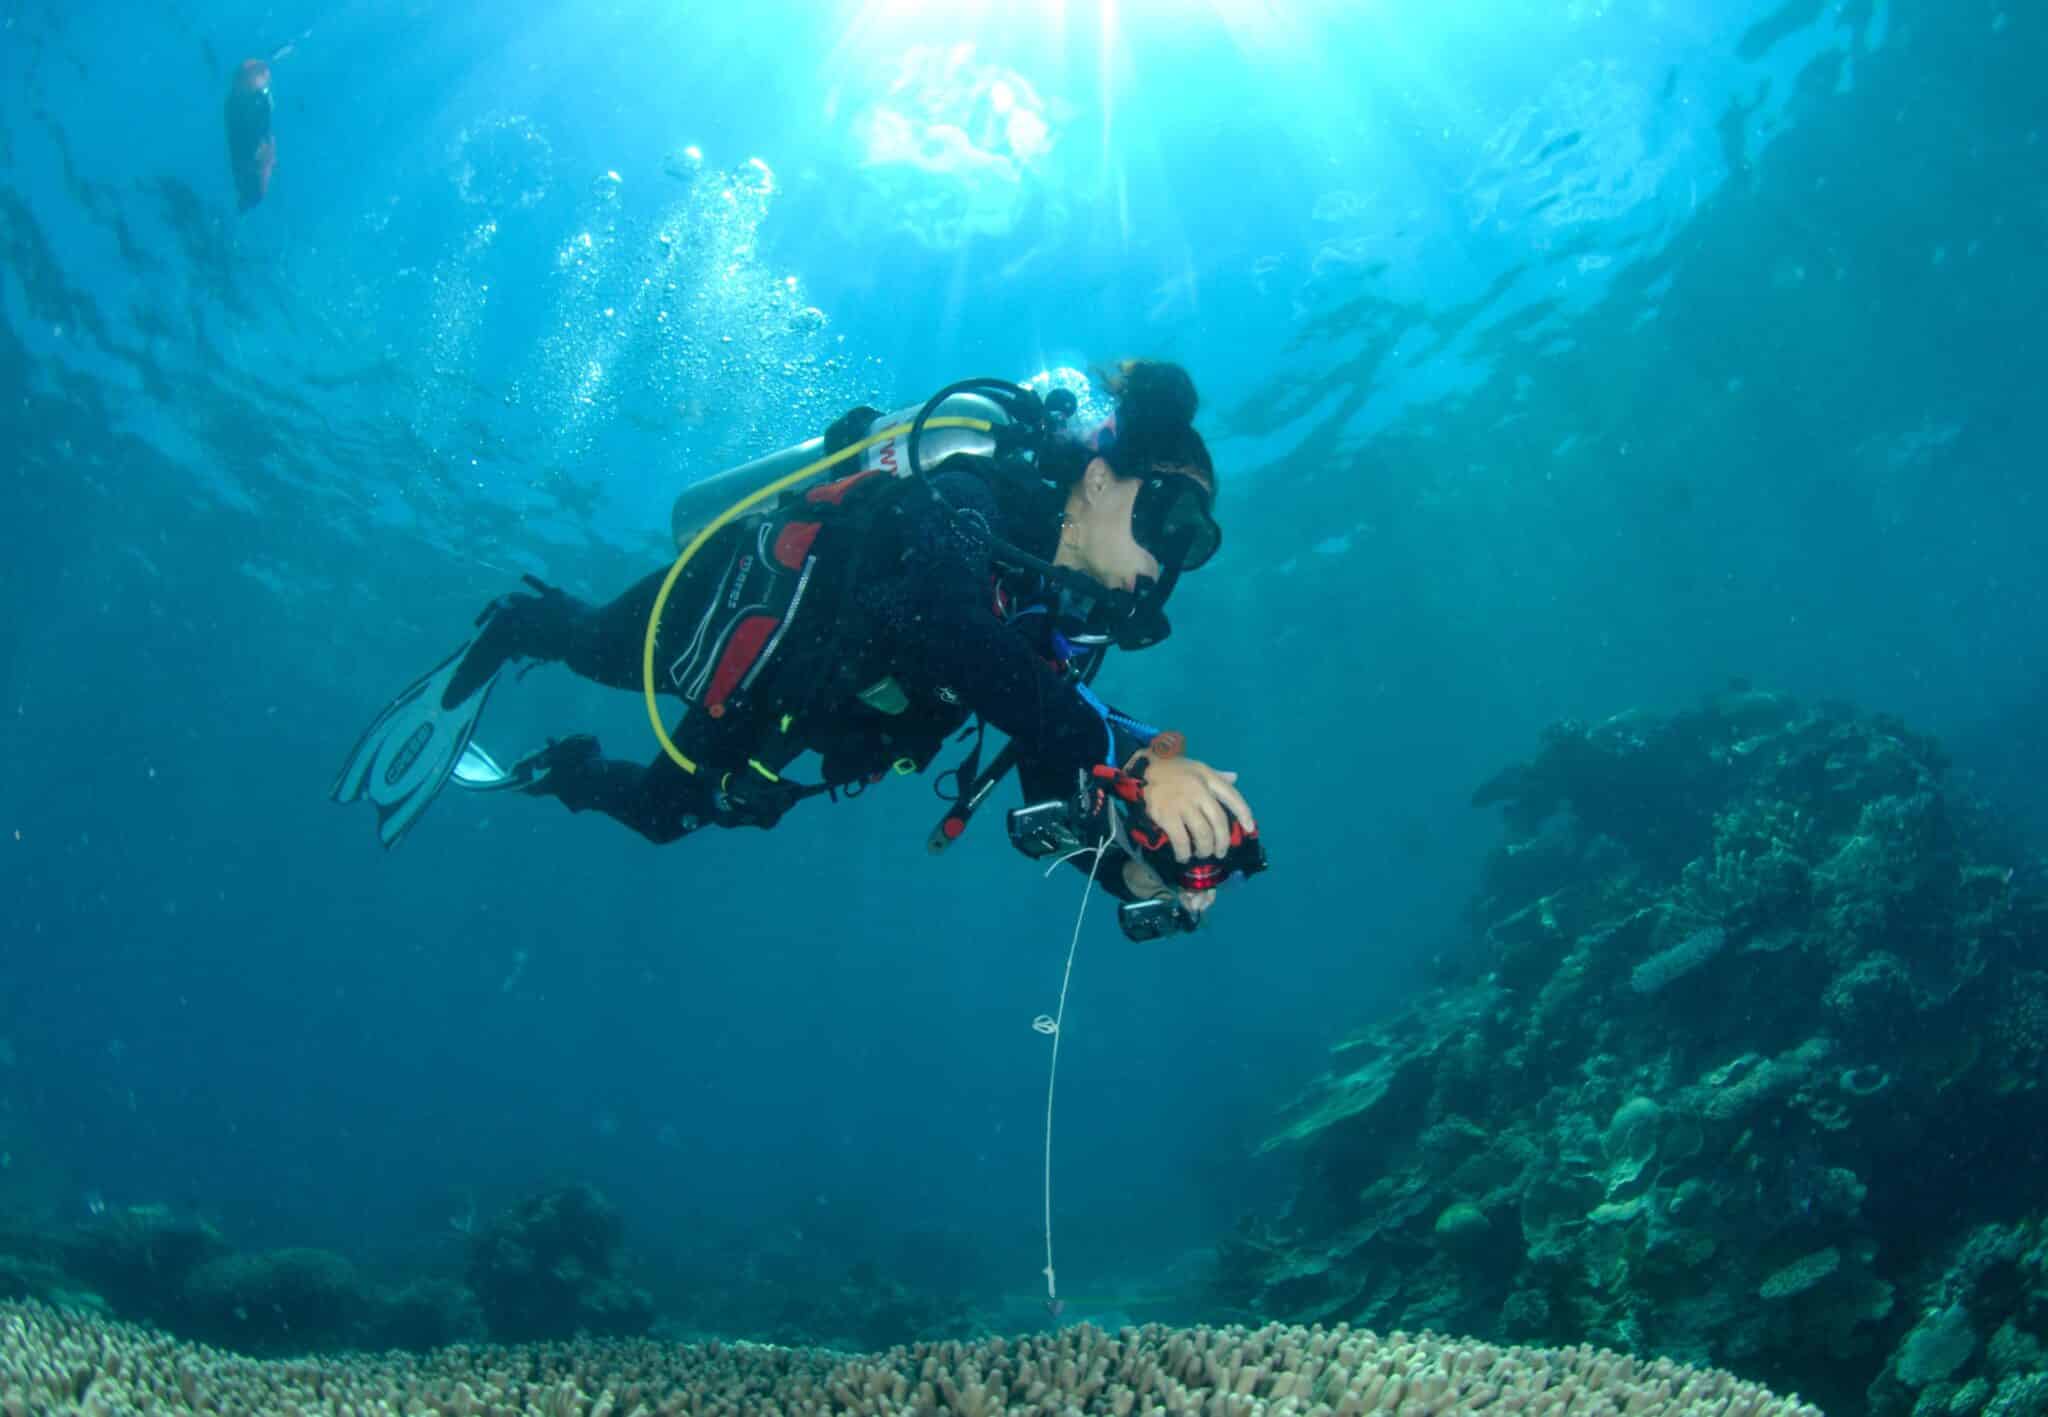 A diver collects data from the Far Northern Great Barrier Reef.